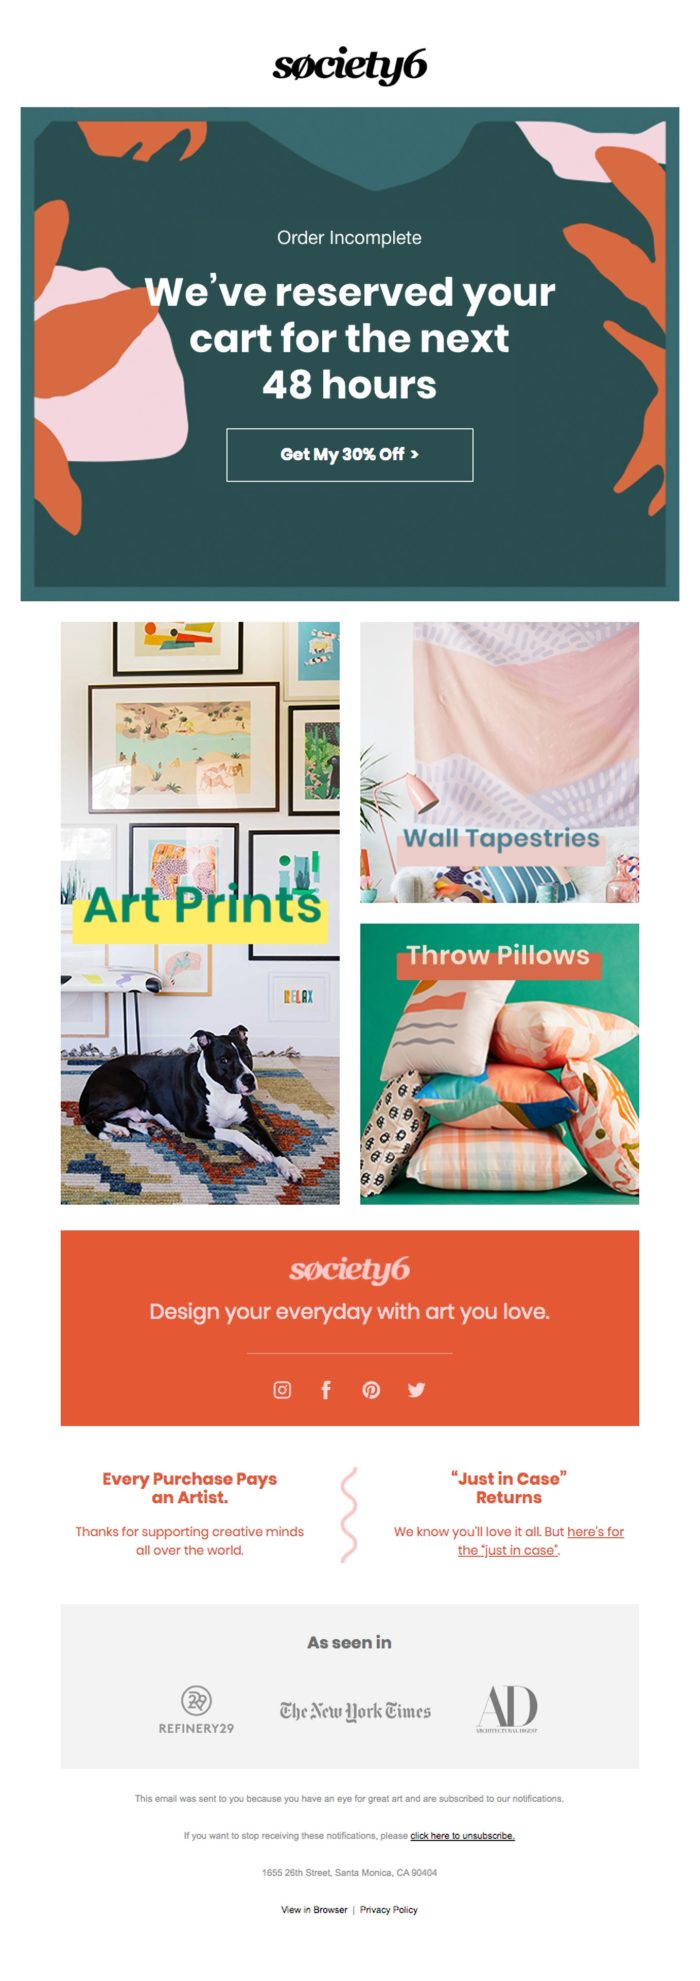 Abandoned cart email examples for 2020: Society6